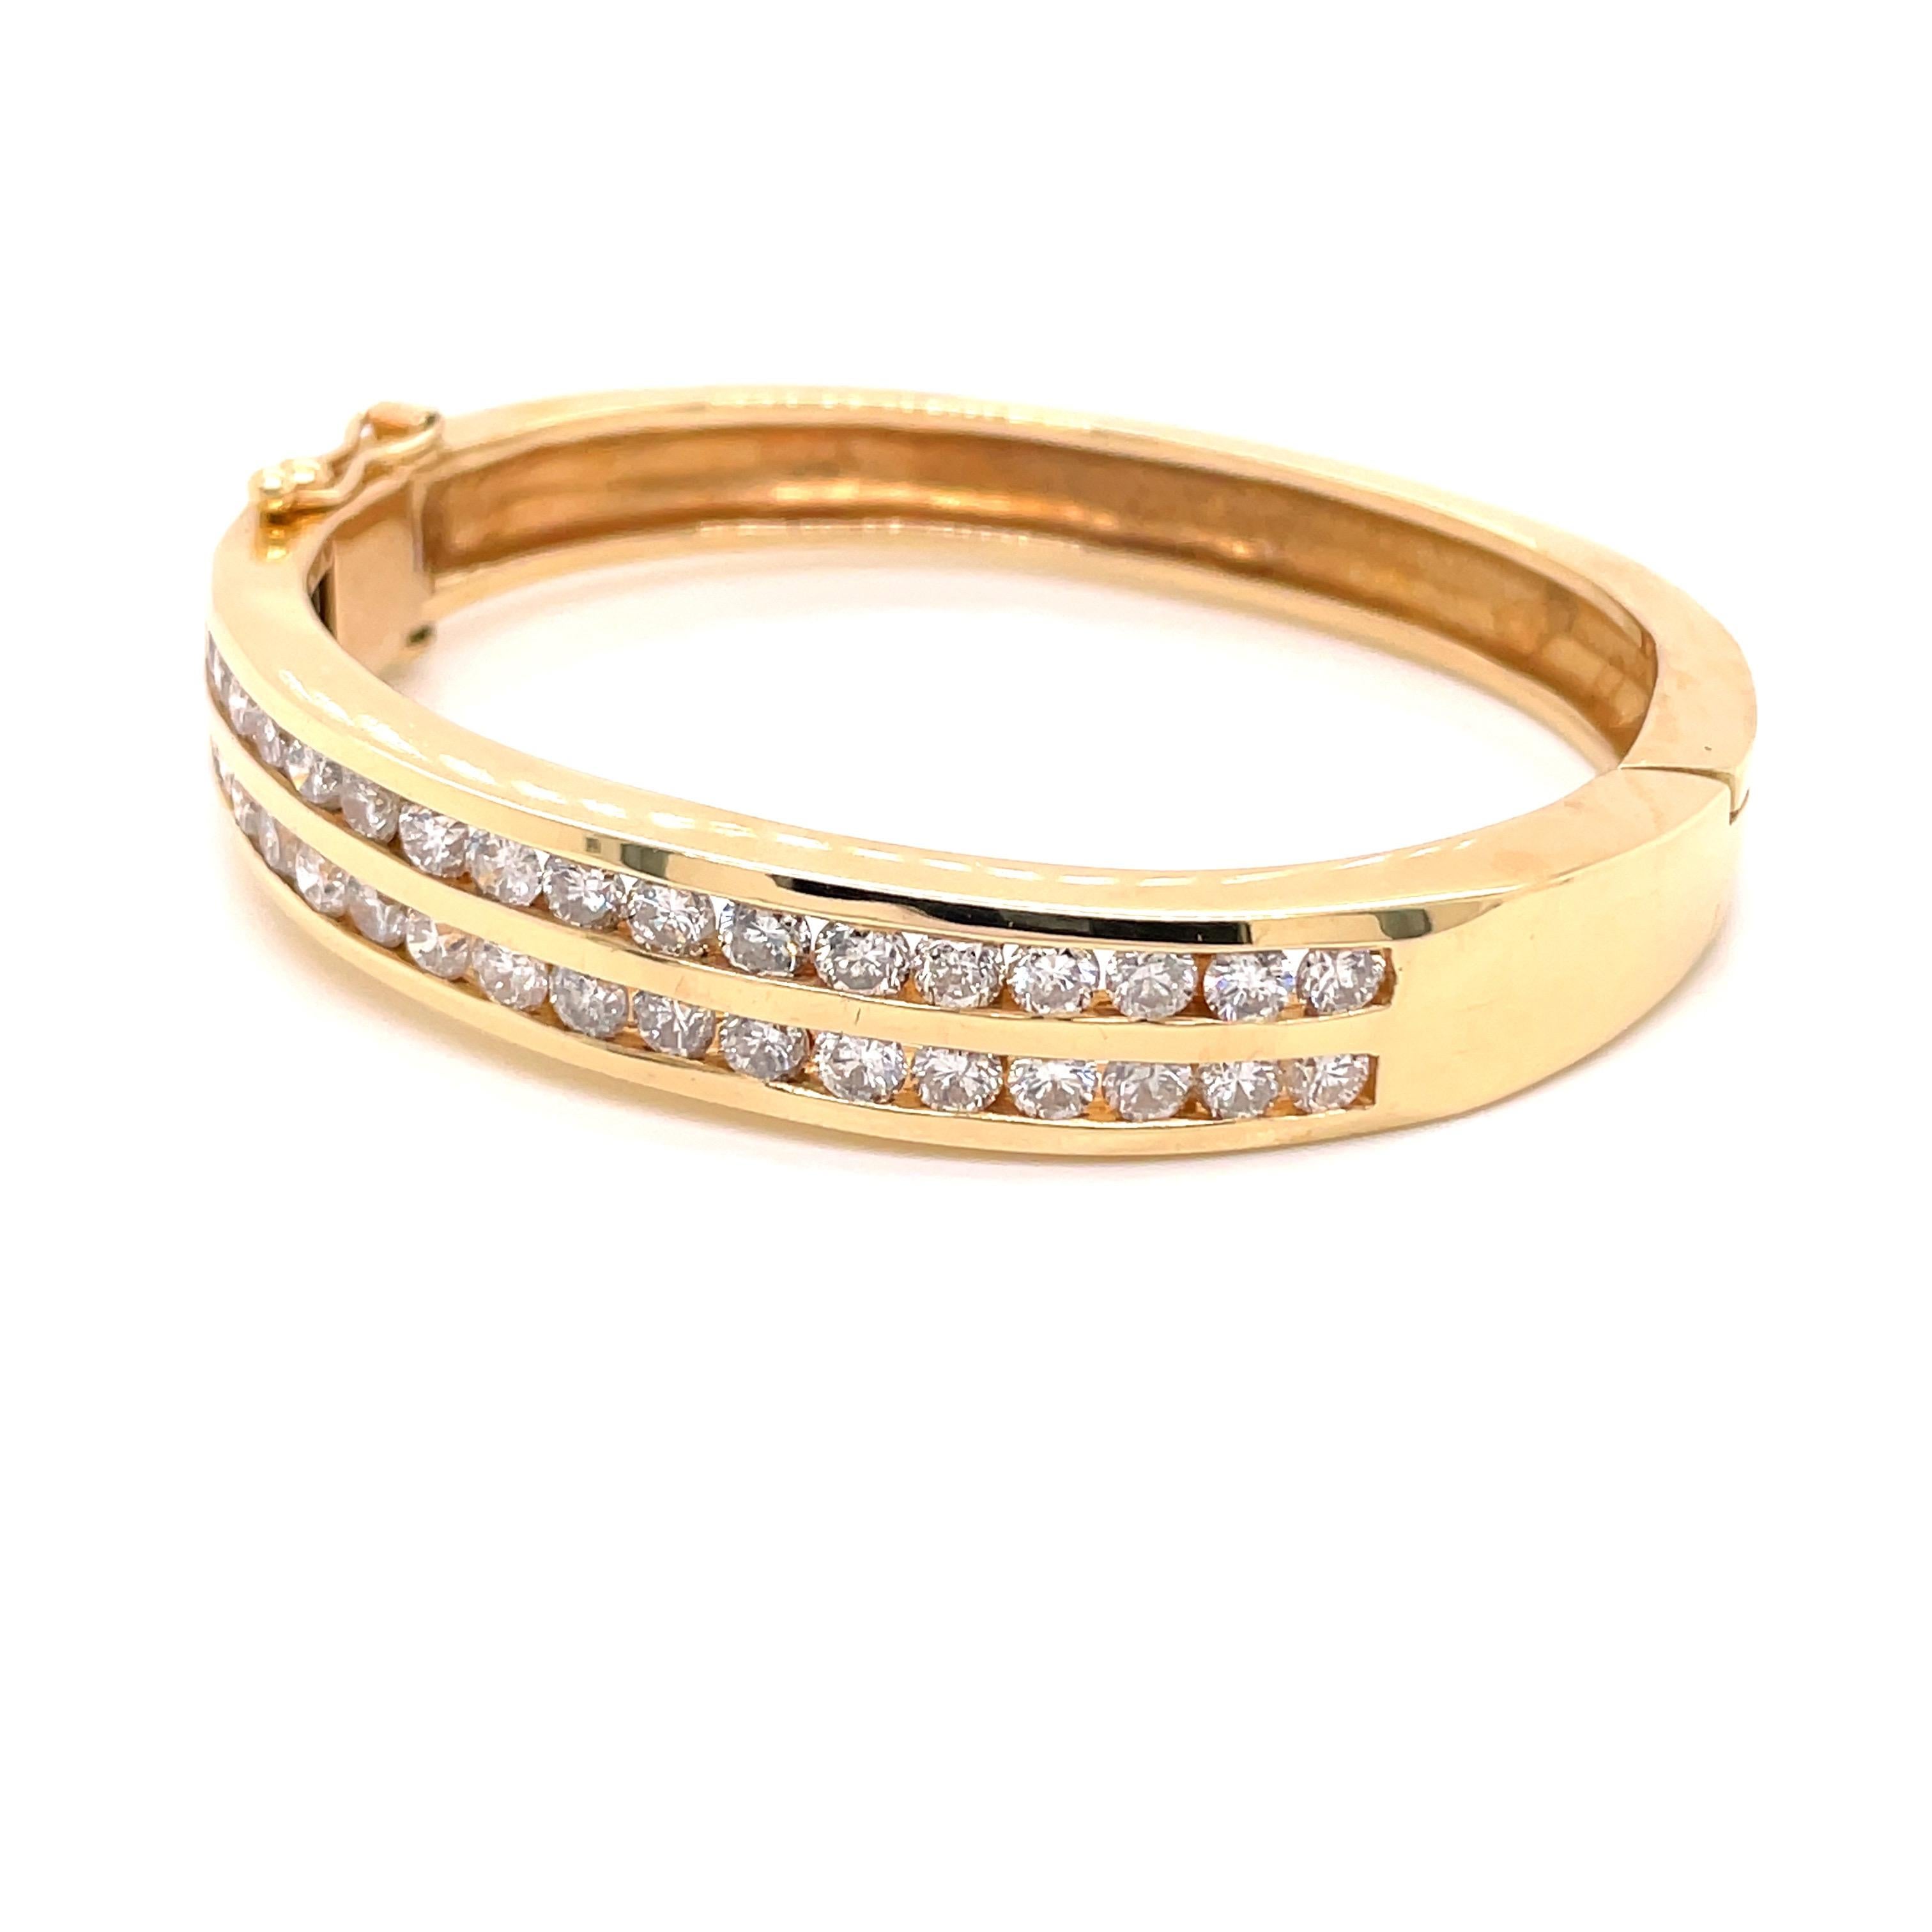 14K Yellow Gold Double Wide Channel Diamond Bangle Bracelet 4.25ct - The bangle is set with 34 round brilliant diamonds weighing 4.25ct with G-I color and I1 clarity. The width of the bangle is 9.7mm on top and tapers to 7.2mm on the bottom. The